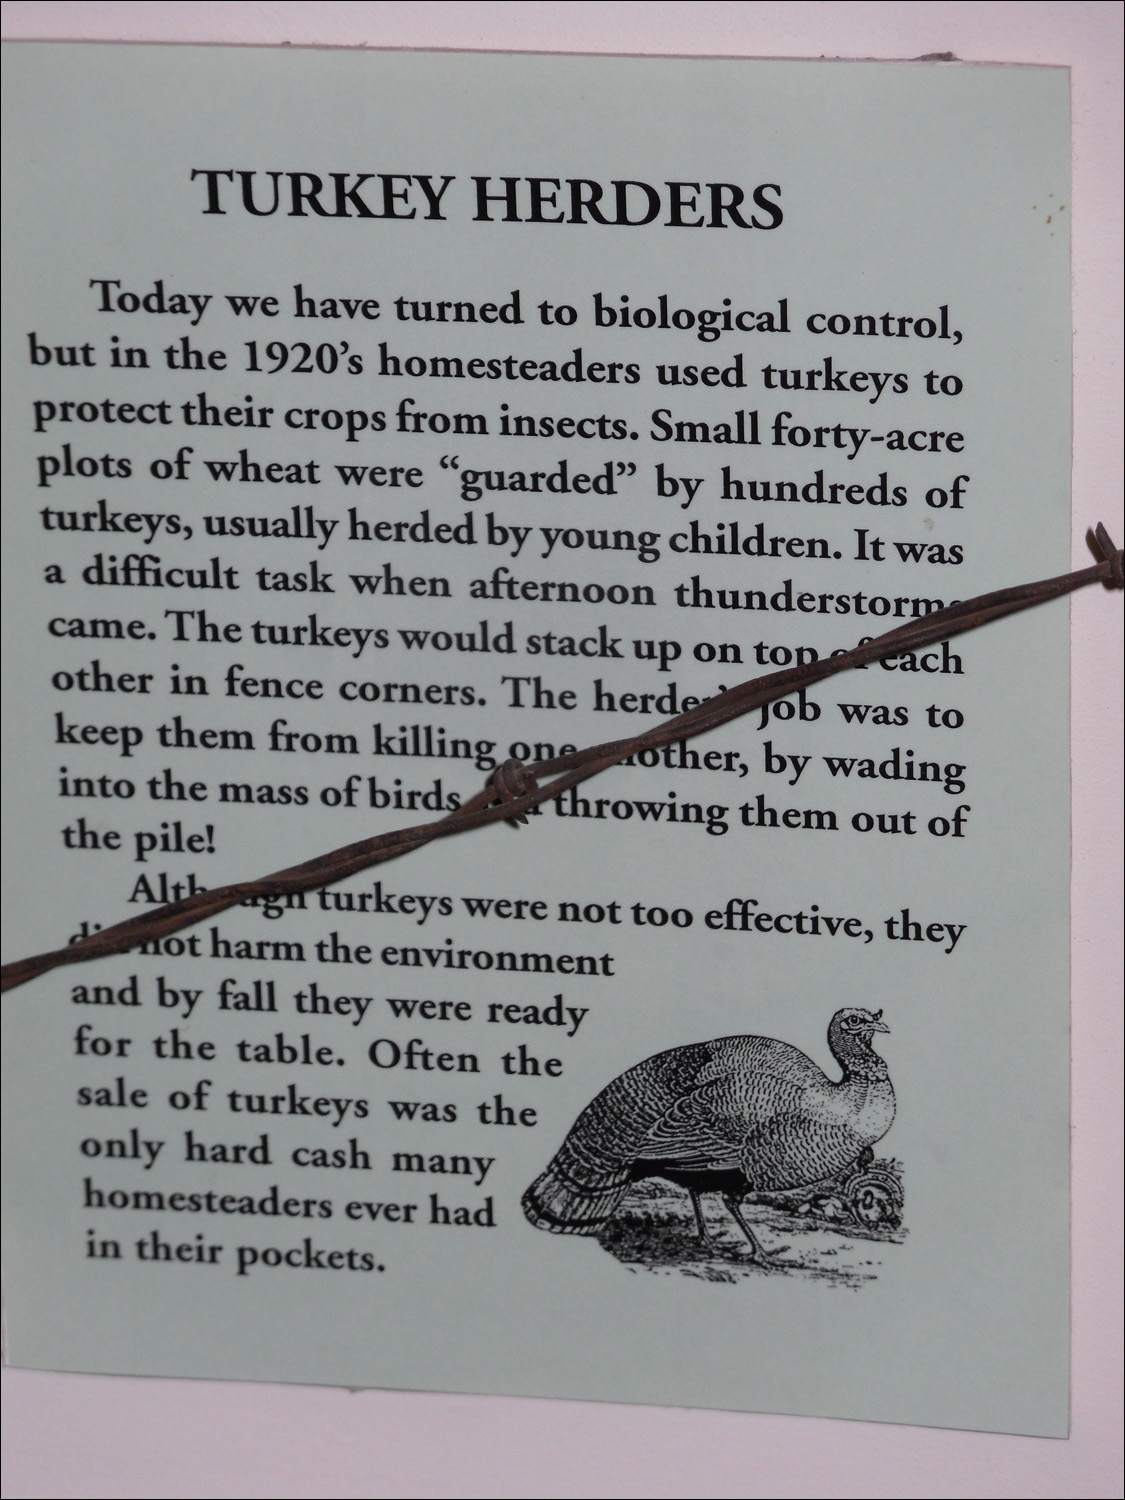 Fort Benton, MT Agriculture Museum-turkeys as crop insect control and Thanksgiving dinner